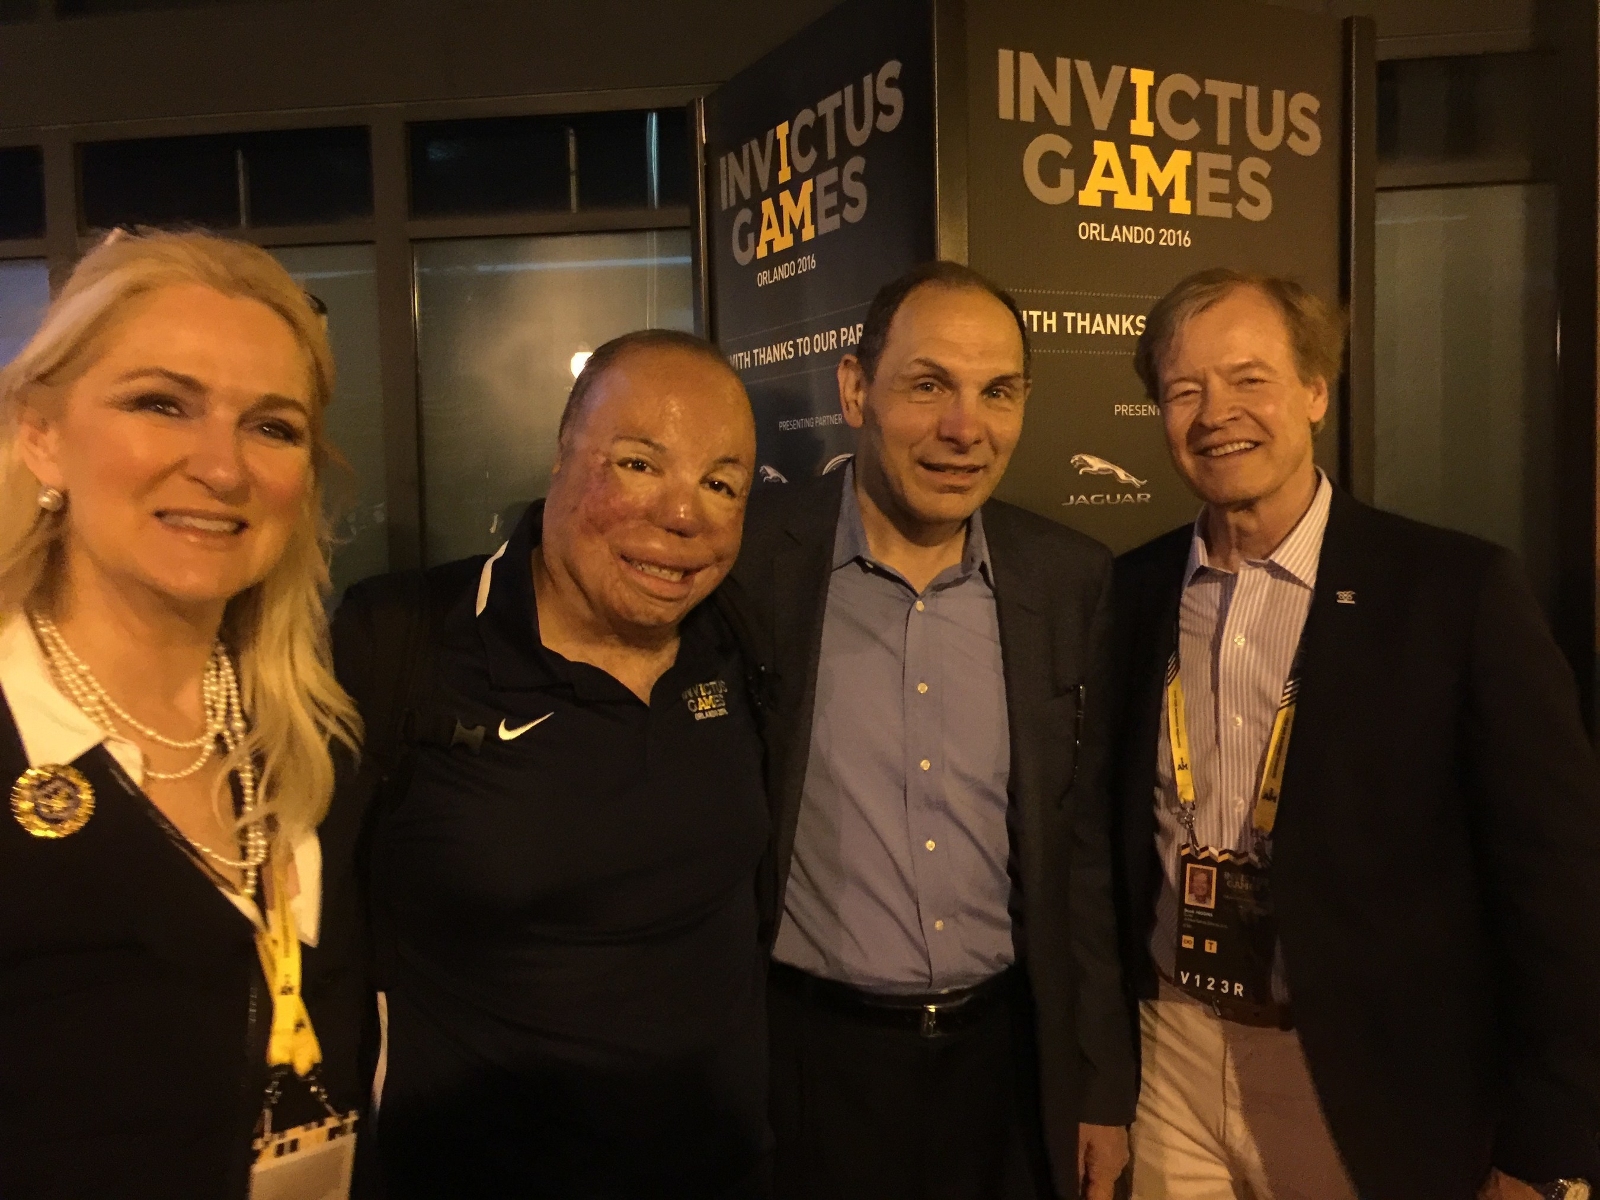 Attendees at the Invictus Games / Veterans Advantage